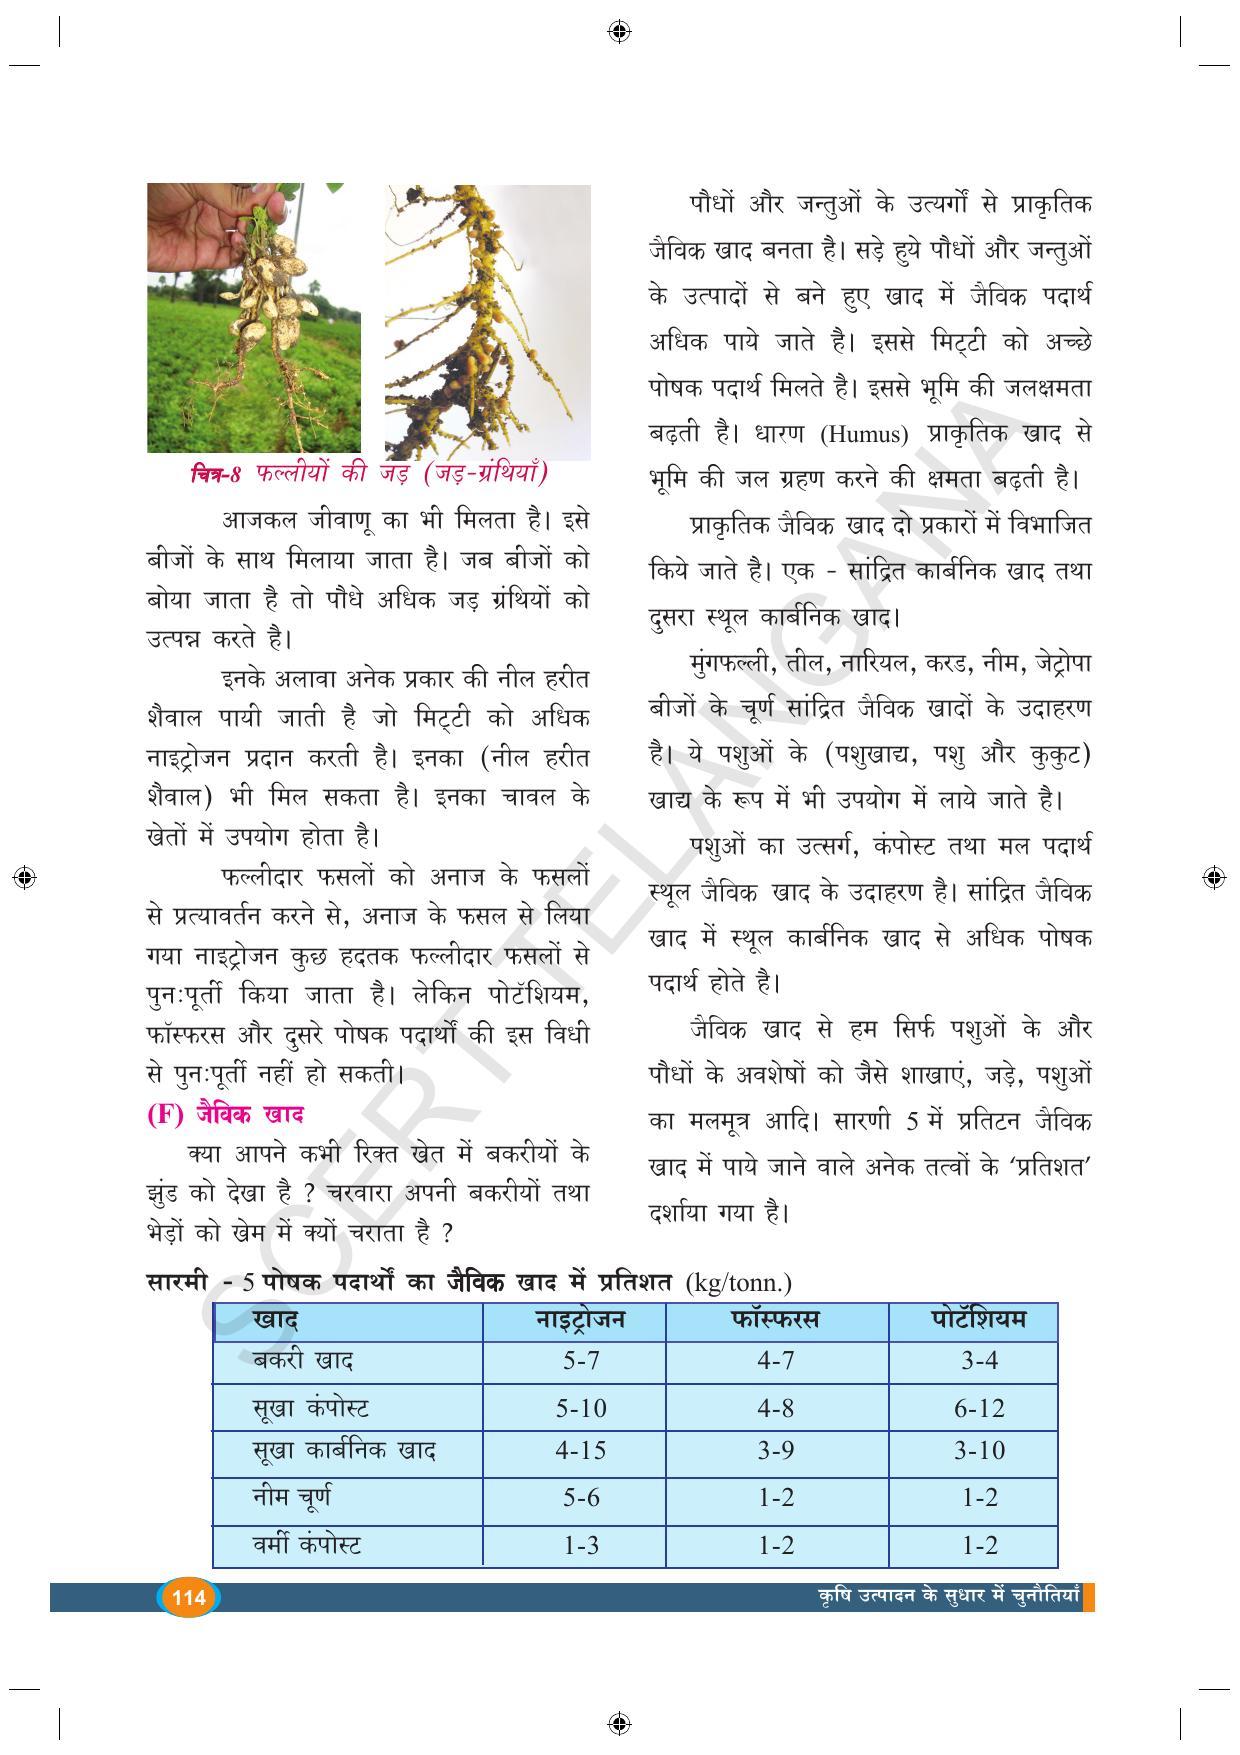 TS SCERT Class 9 Biological Science (Hindi Medium) Text Book - Page 126